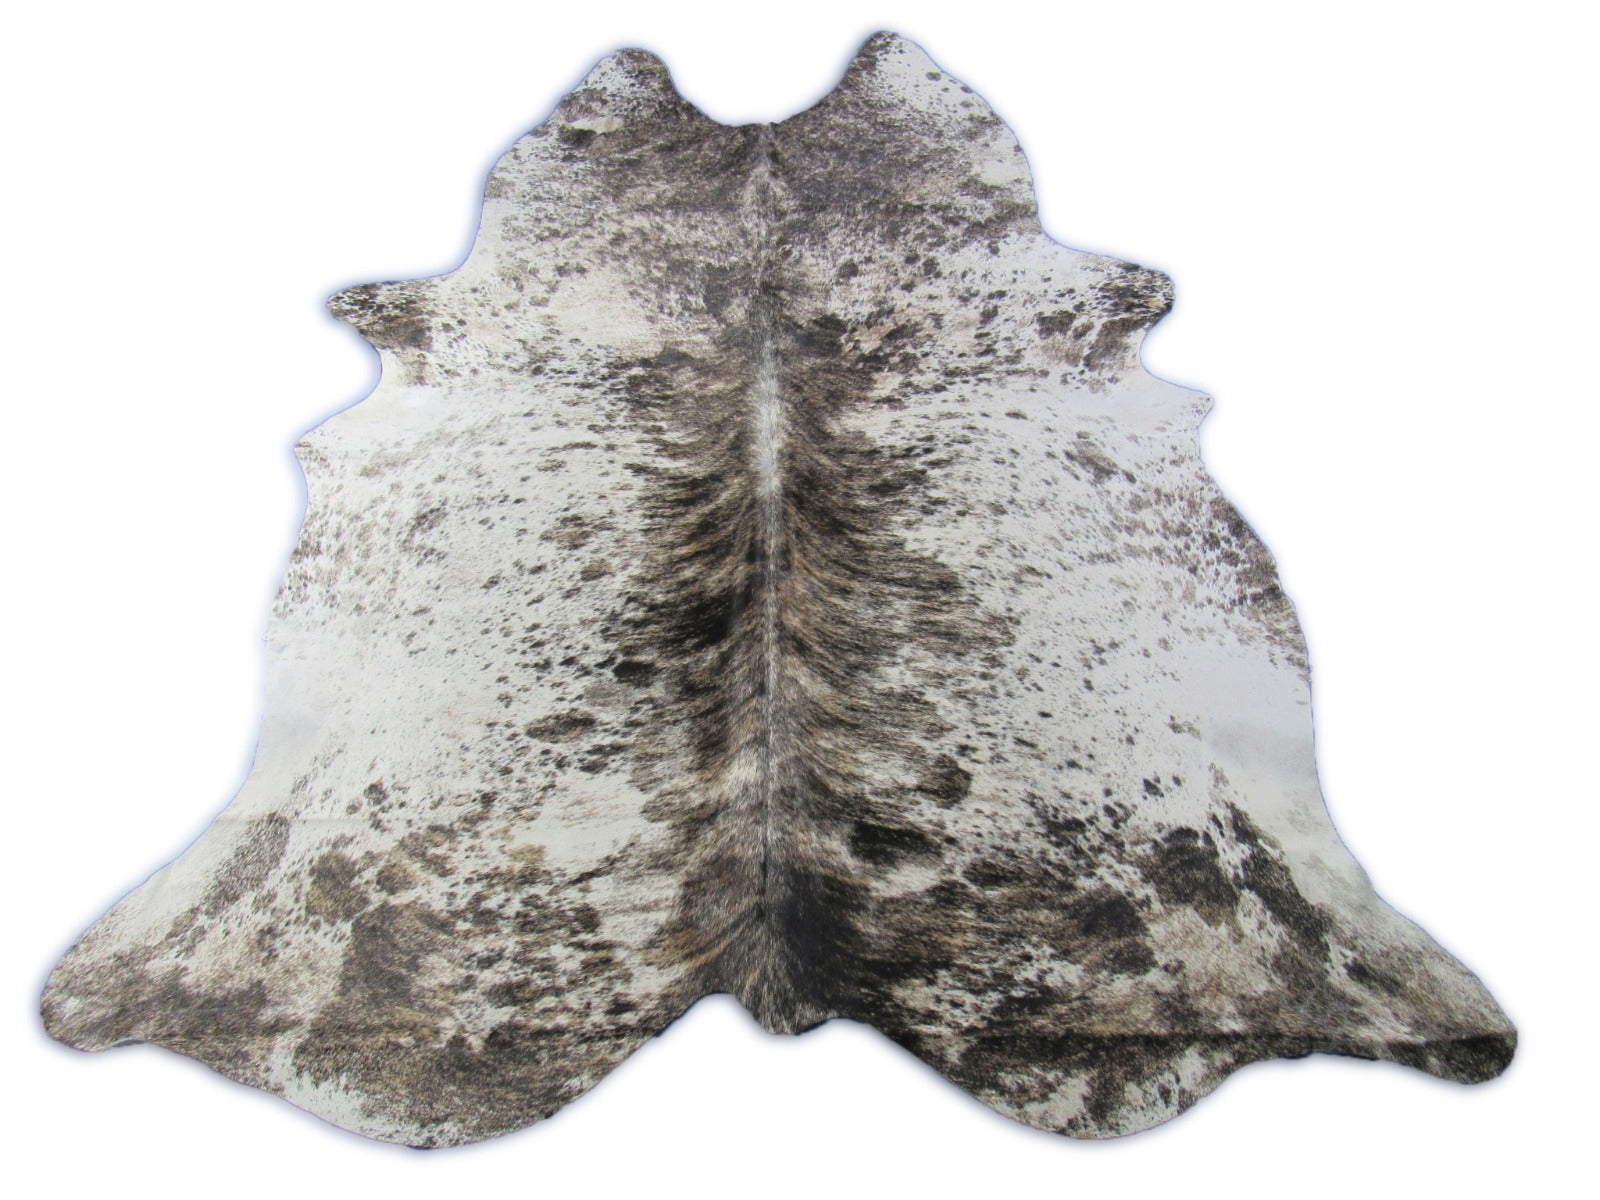 Gorgeous Grey Speckled Tricolor Cowhide Rug - Size: 7.2x6.7 feet O-1199